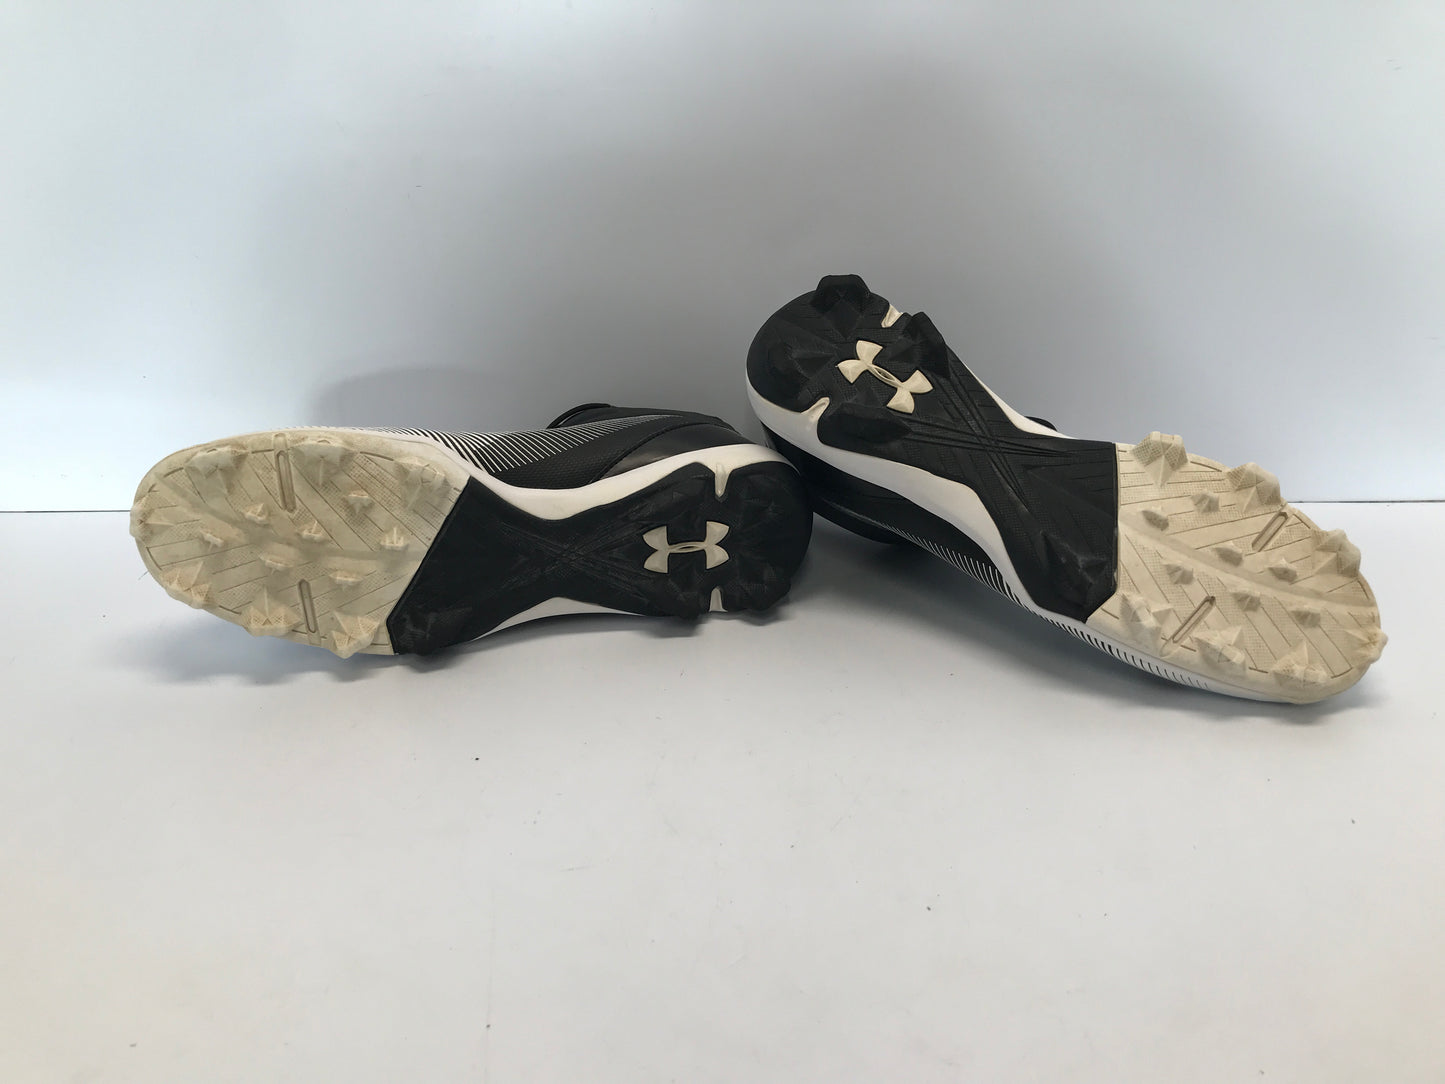 Baseball Shoes Cleats Men's Size 10 Under Armour High Tops Black White Like New